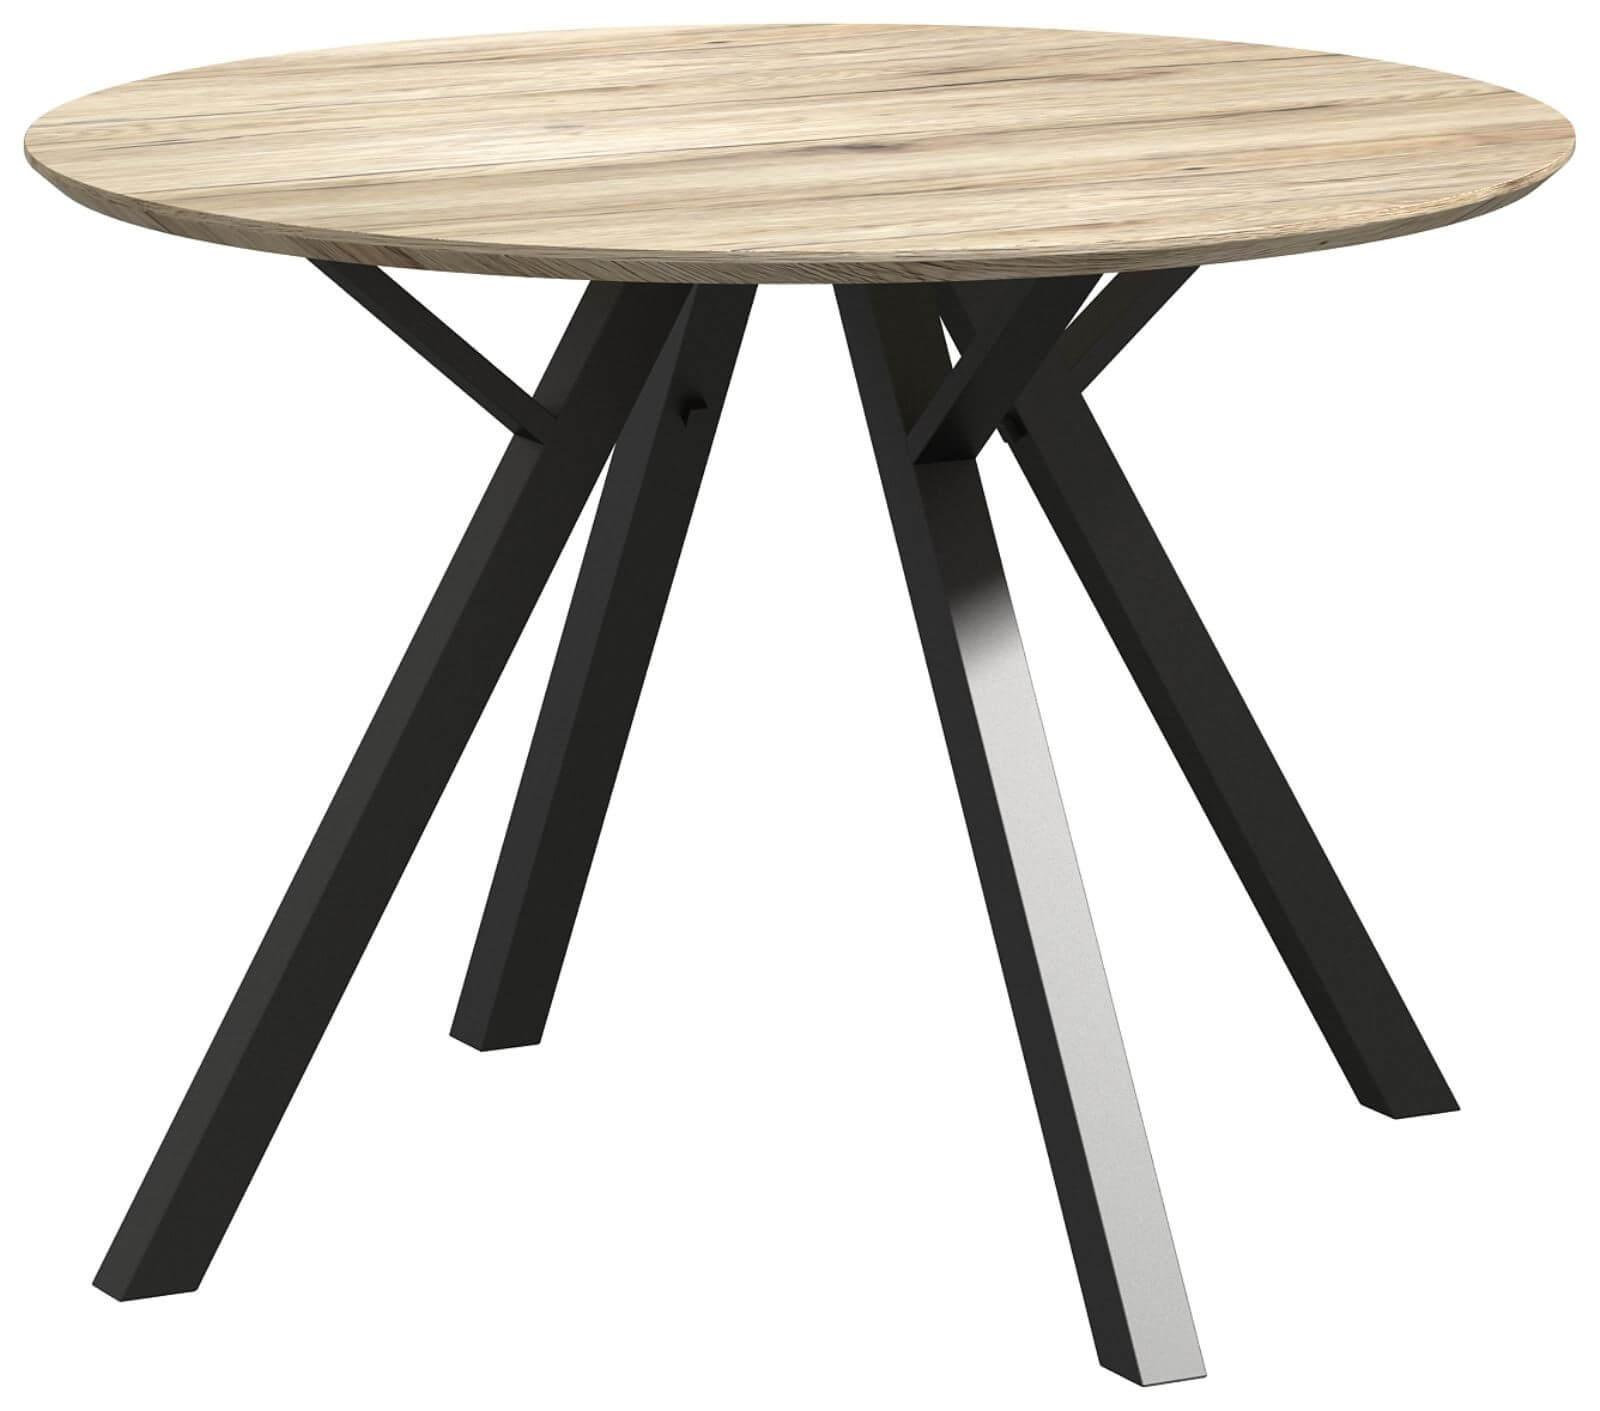 Showing image for Detroit dining table - round